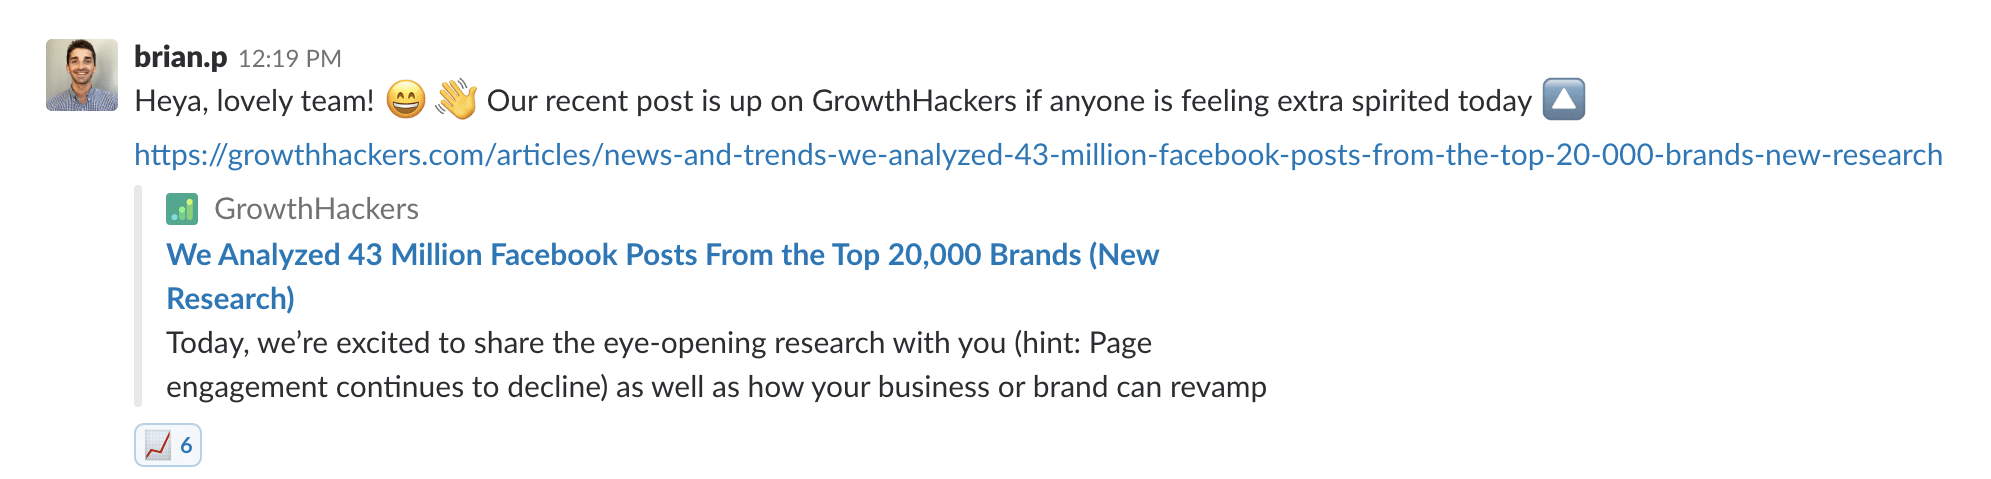 Ask for Content Upvotes on GrowthHackers